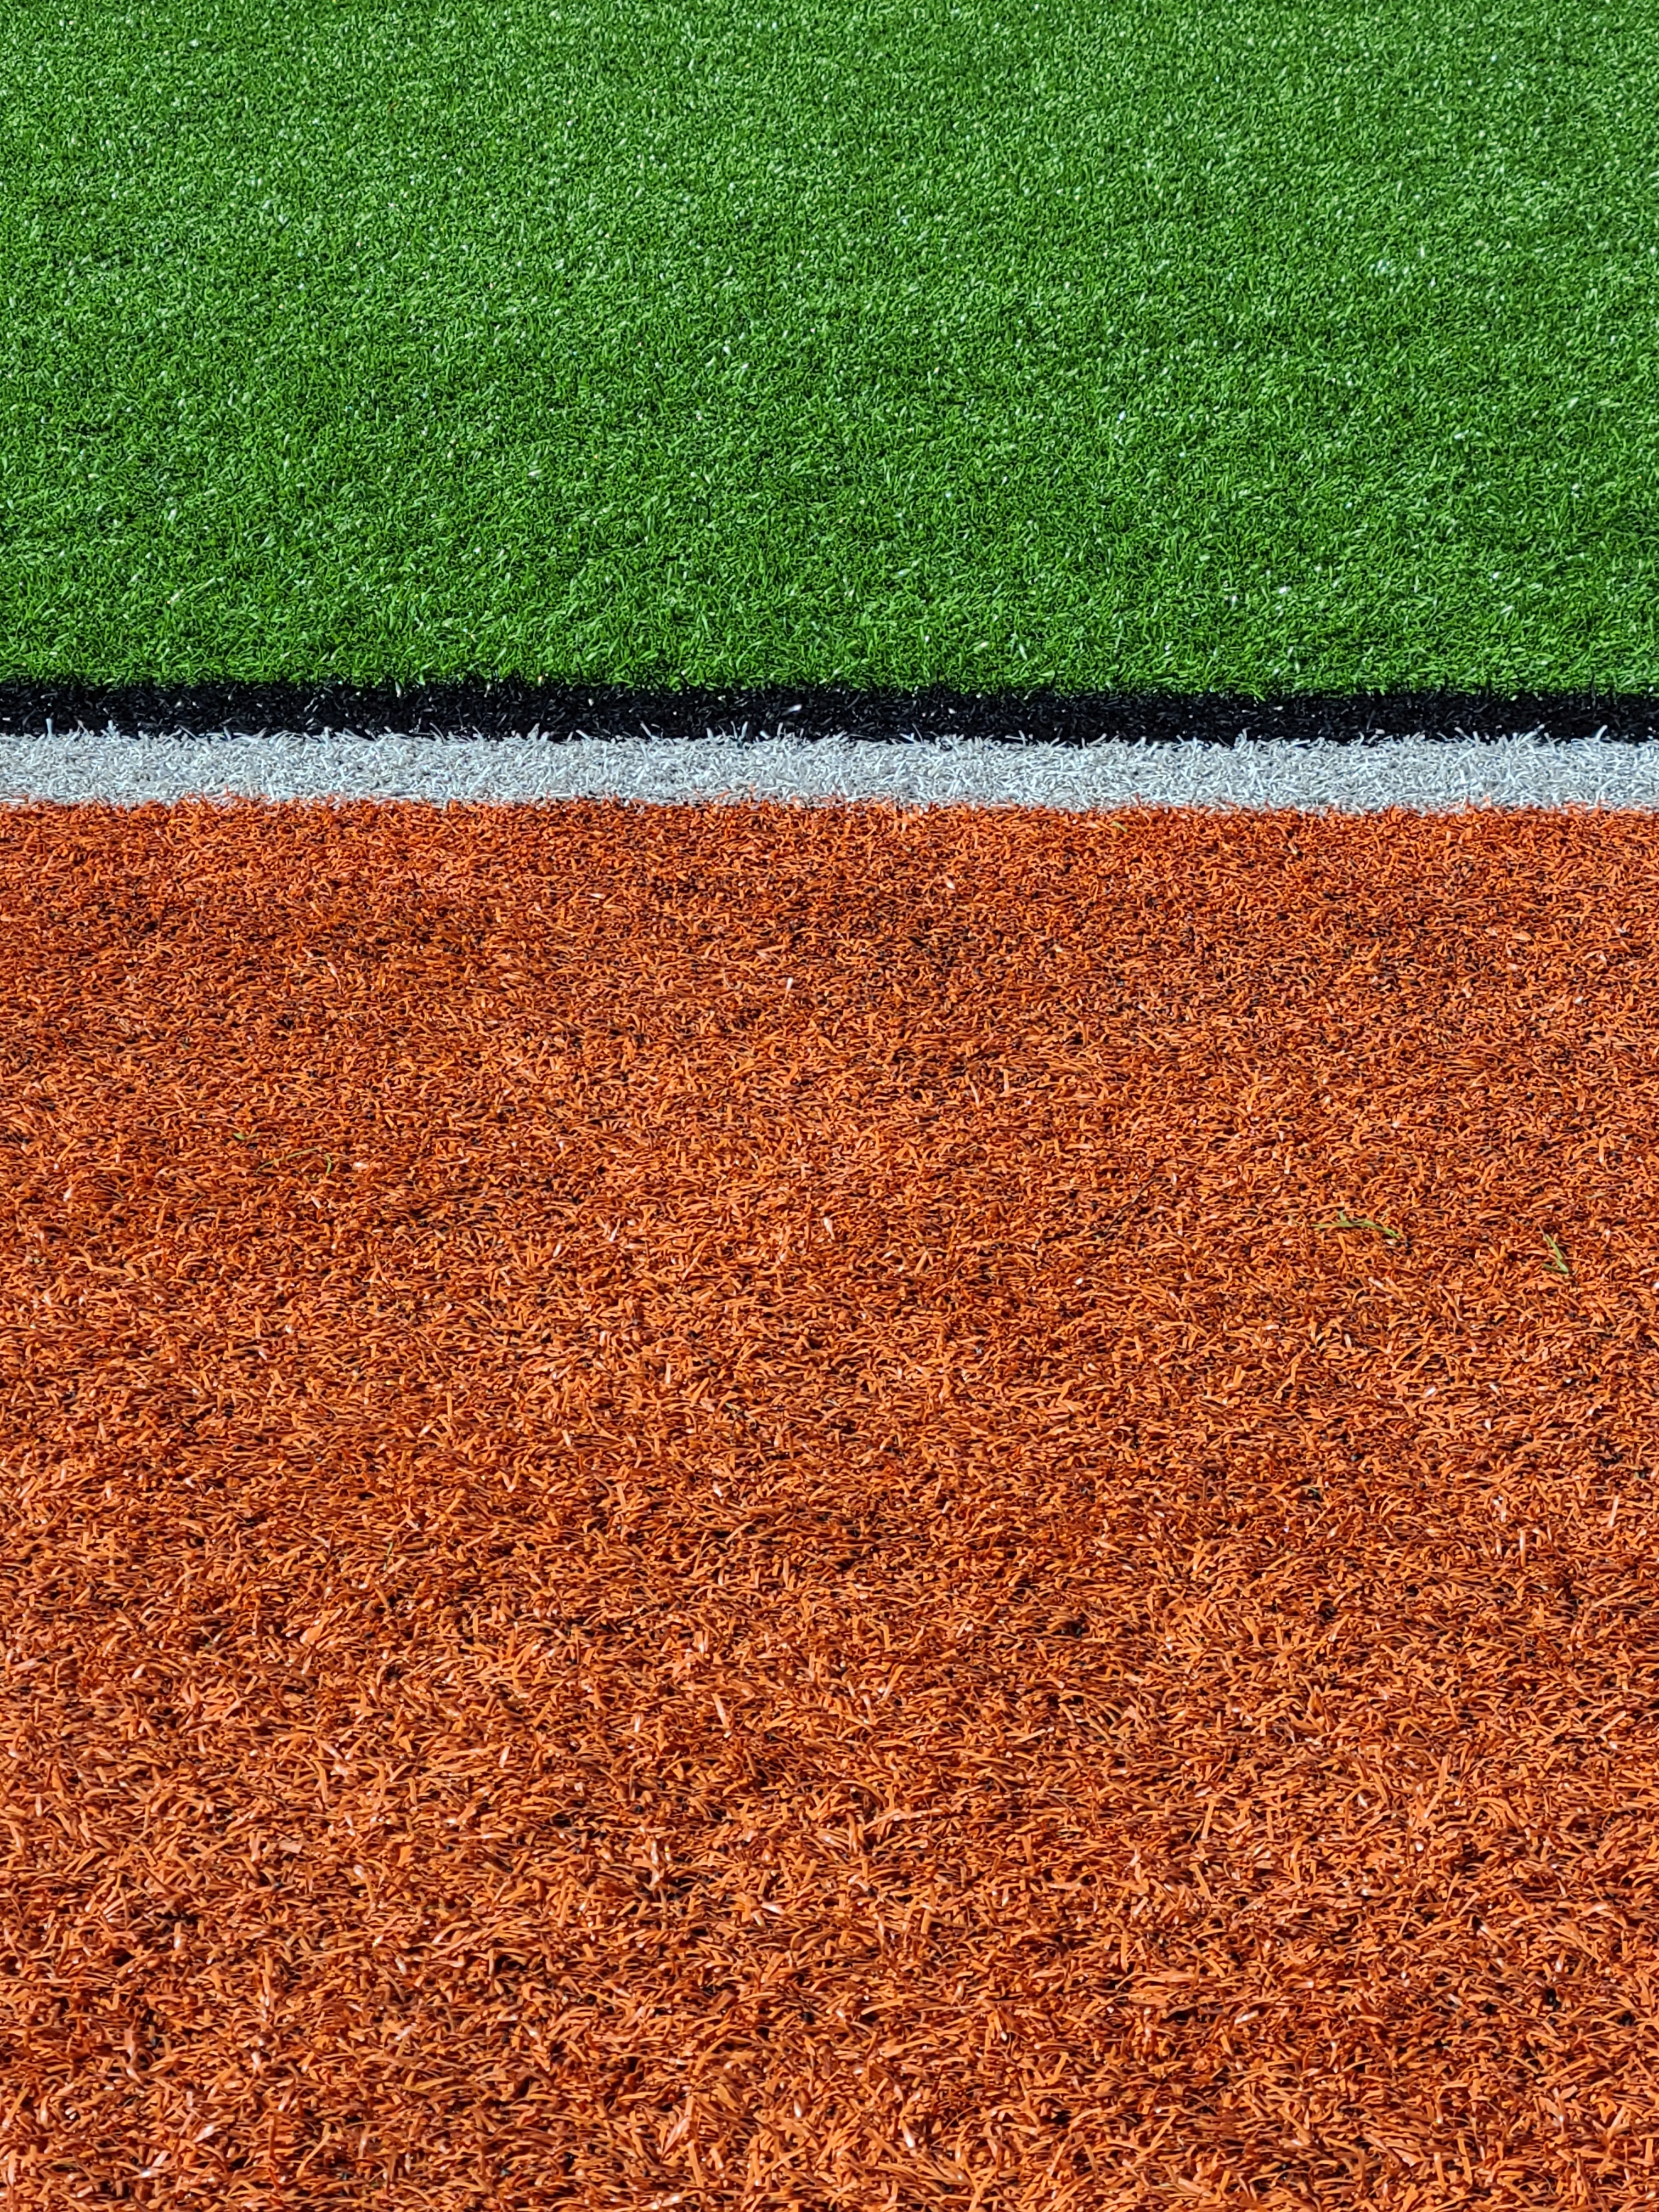 grass, texture, textures, stripes, streaks, lawn, coating, covering